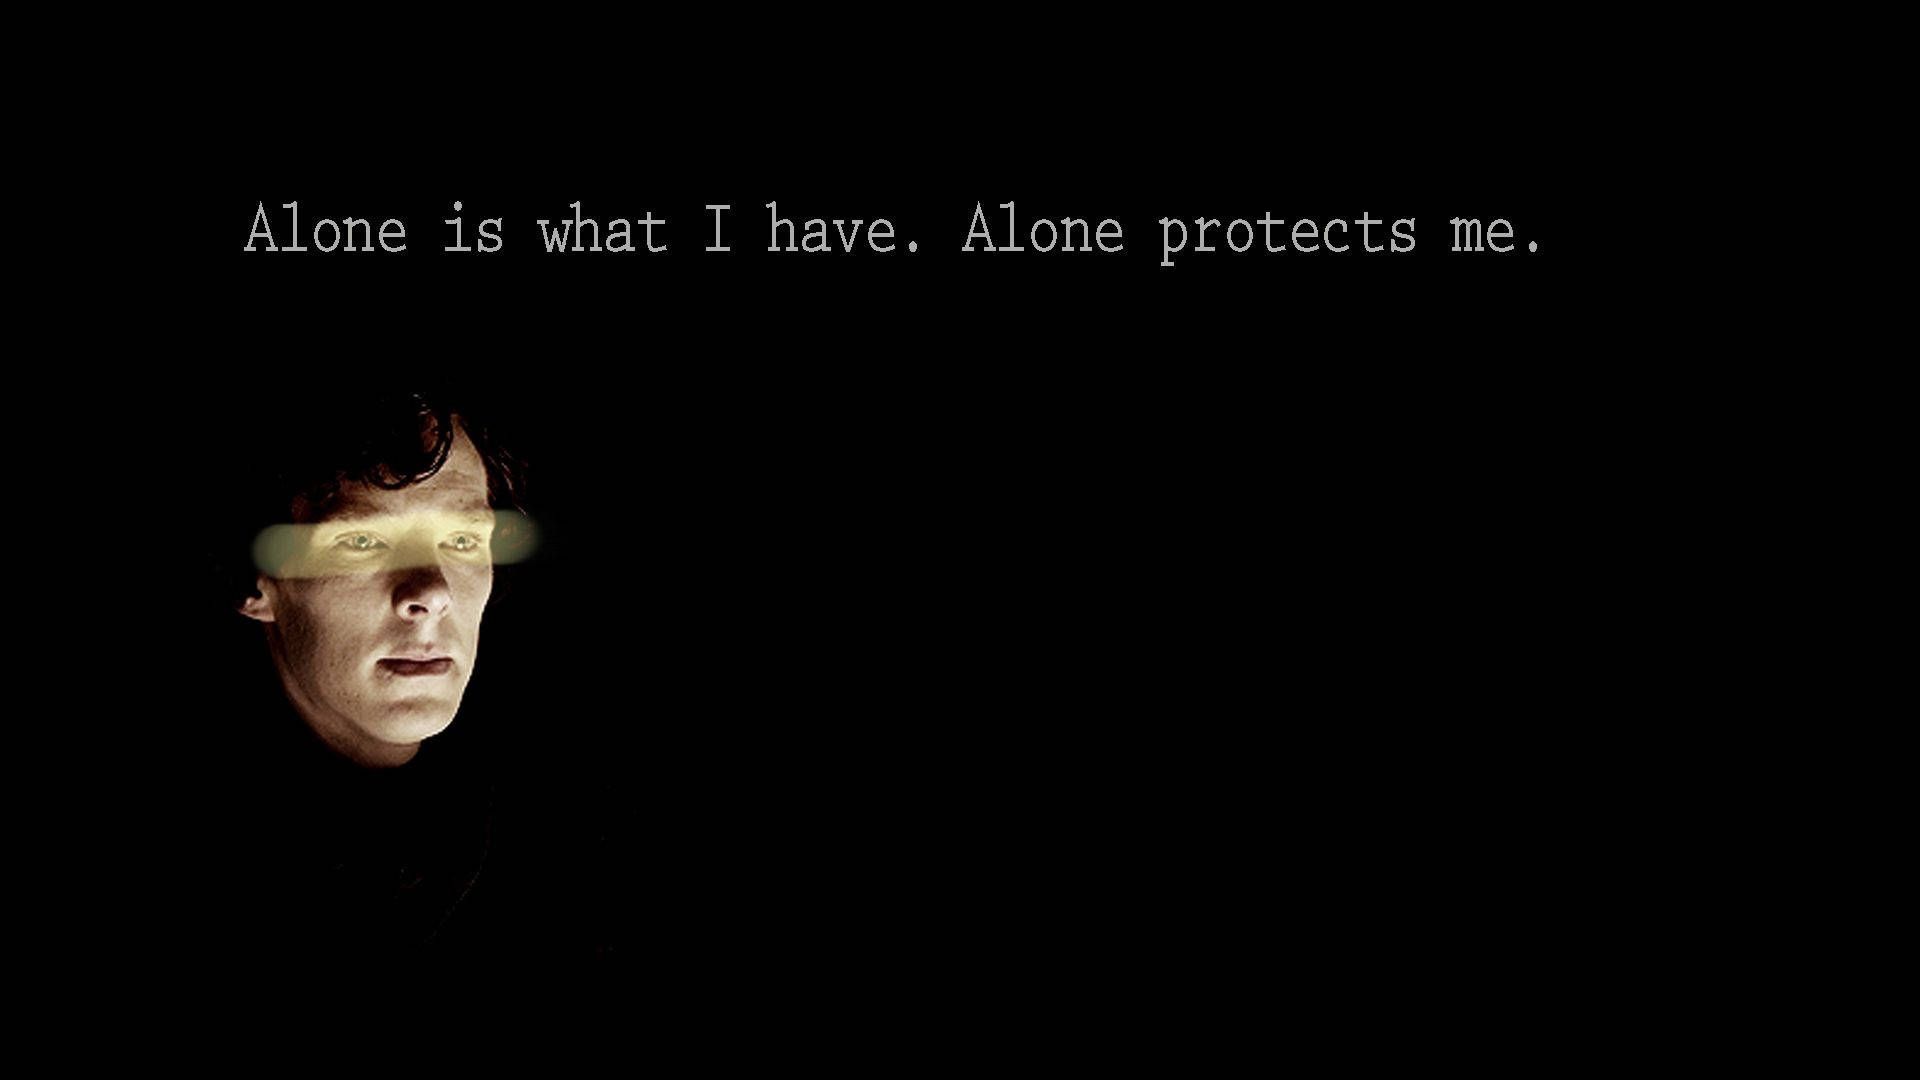 Alone is what I have. Alone protects me. - Sad quotes